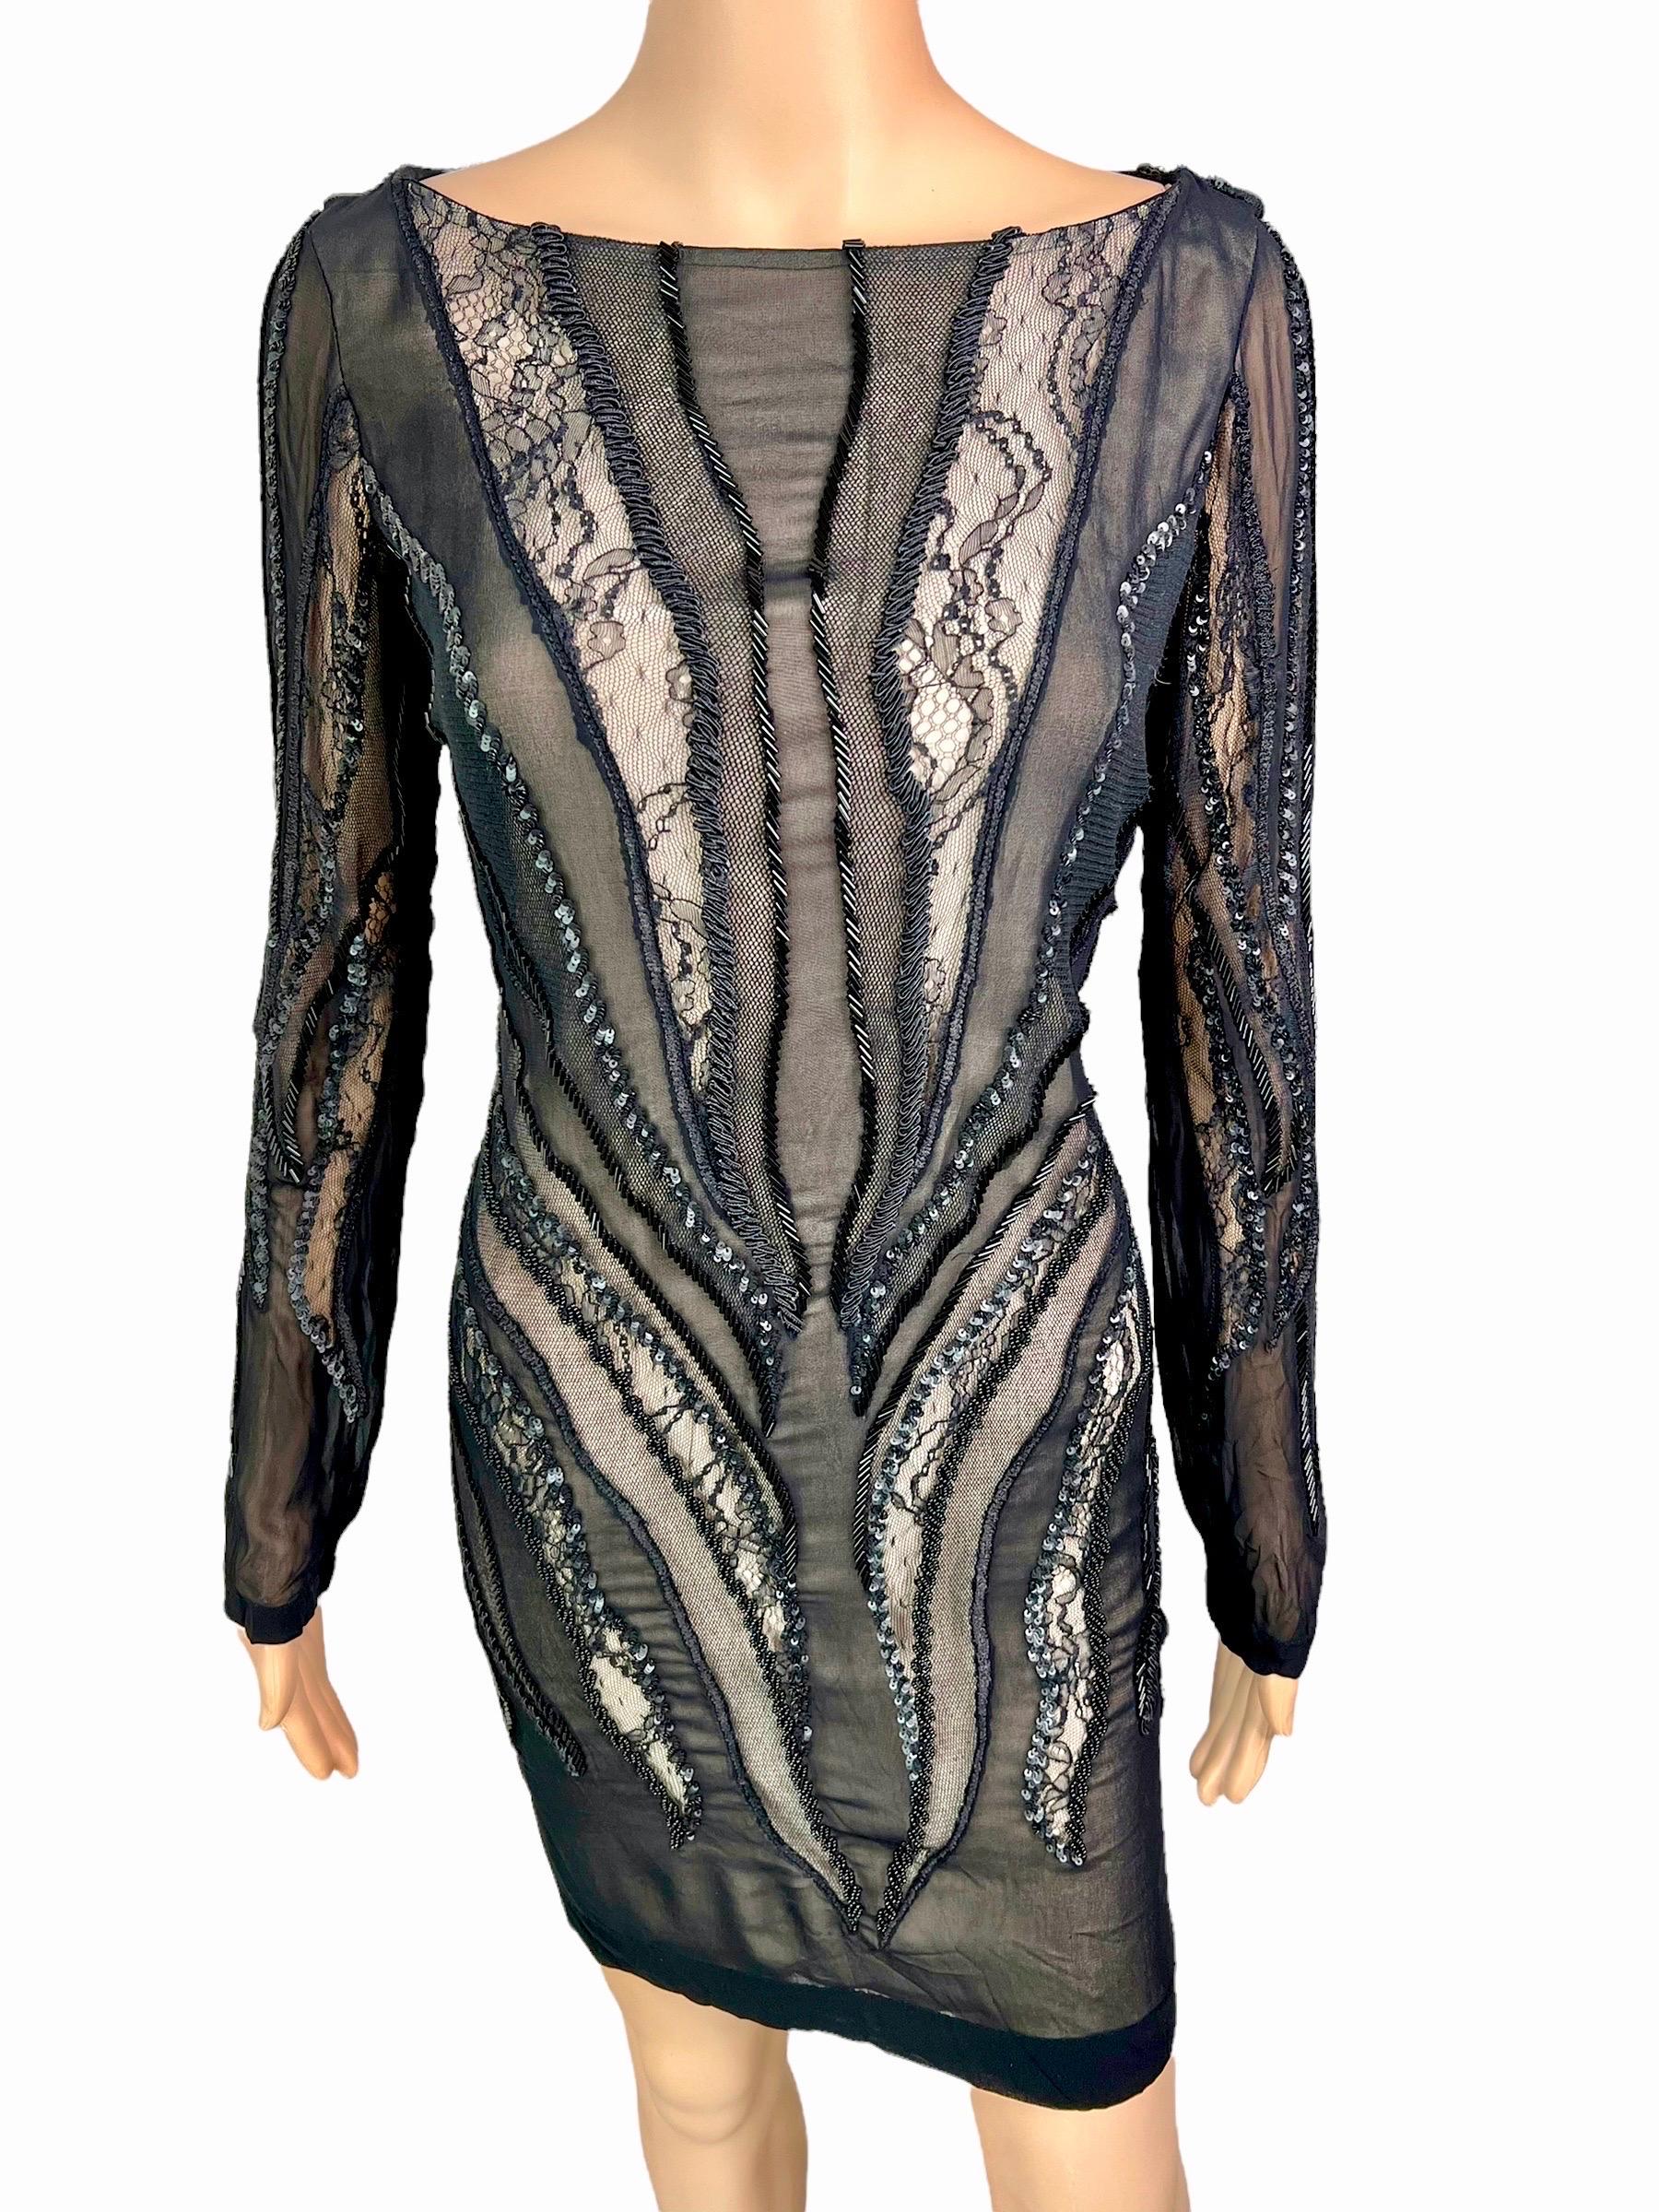 Roberto Cavalli c.2012 Unworn Embellished Sheer Lace Black Mini Dress In New Condition For Sale In Naples, FL